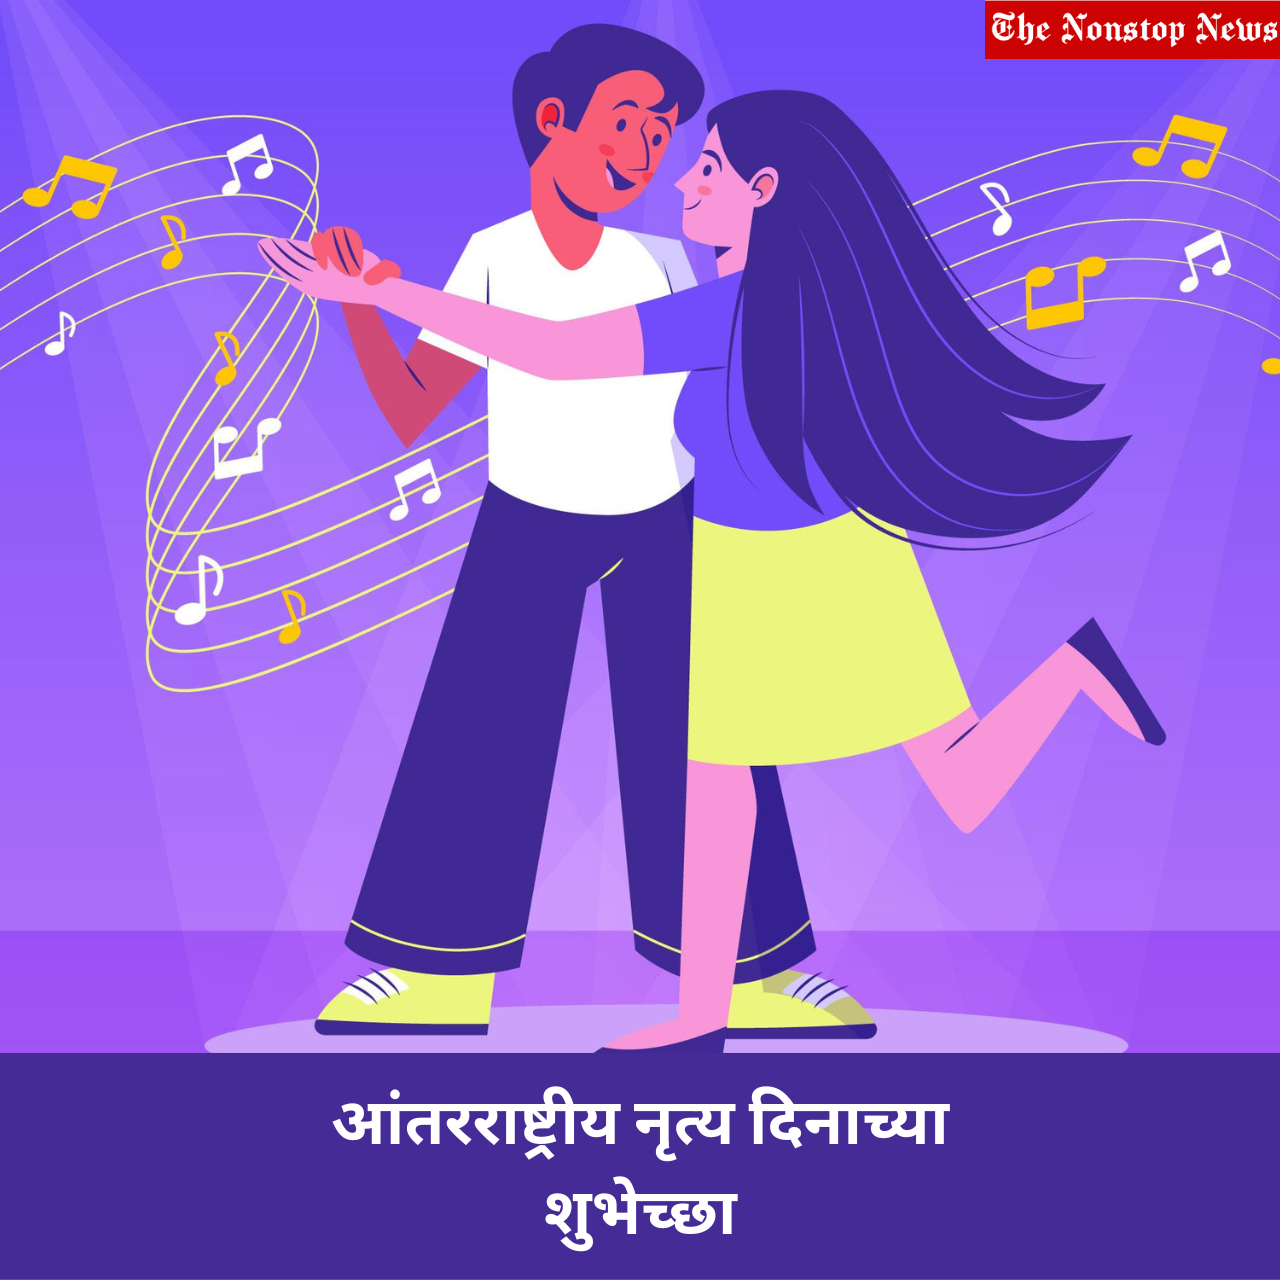 Happy International Dance Day 2023 Marathi Shayari, Wishes, Messages, Images, Quotes, Greetings, Sayings and Posters